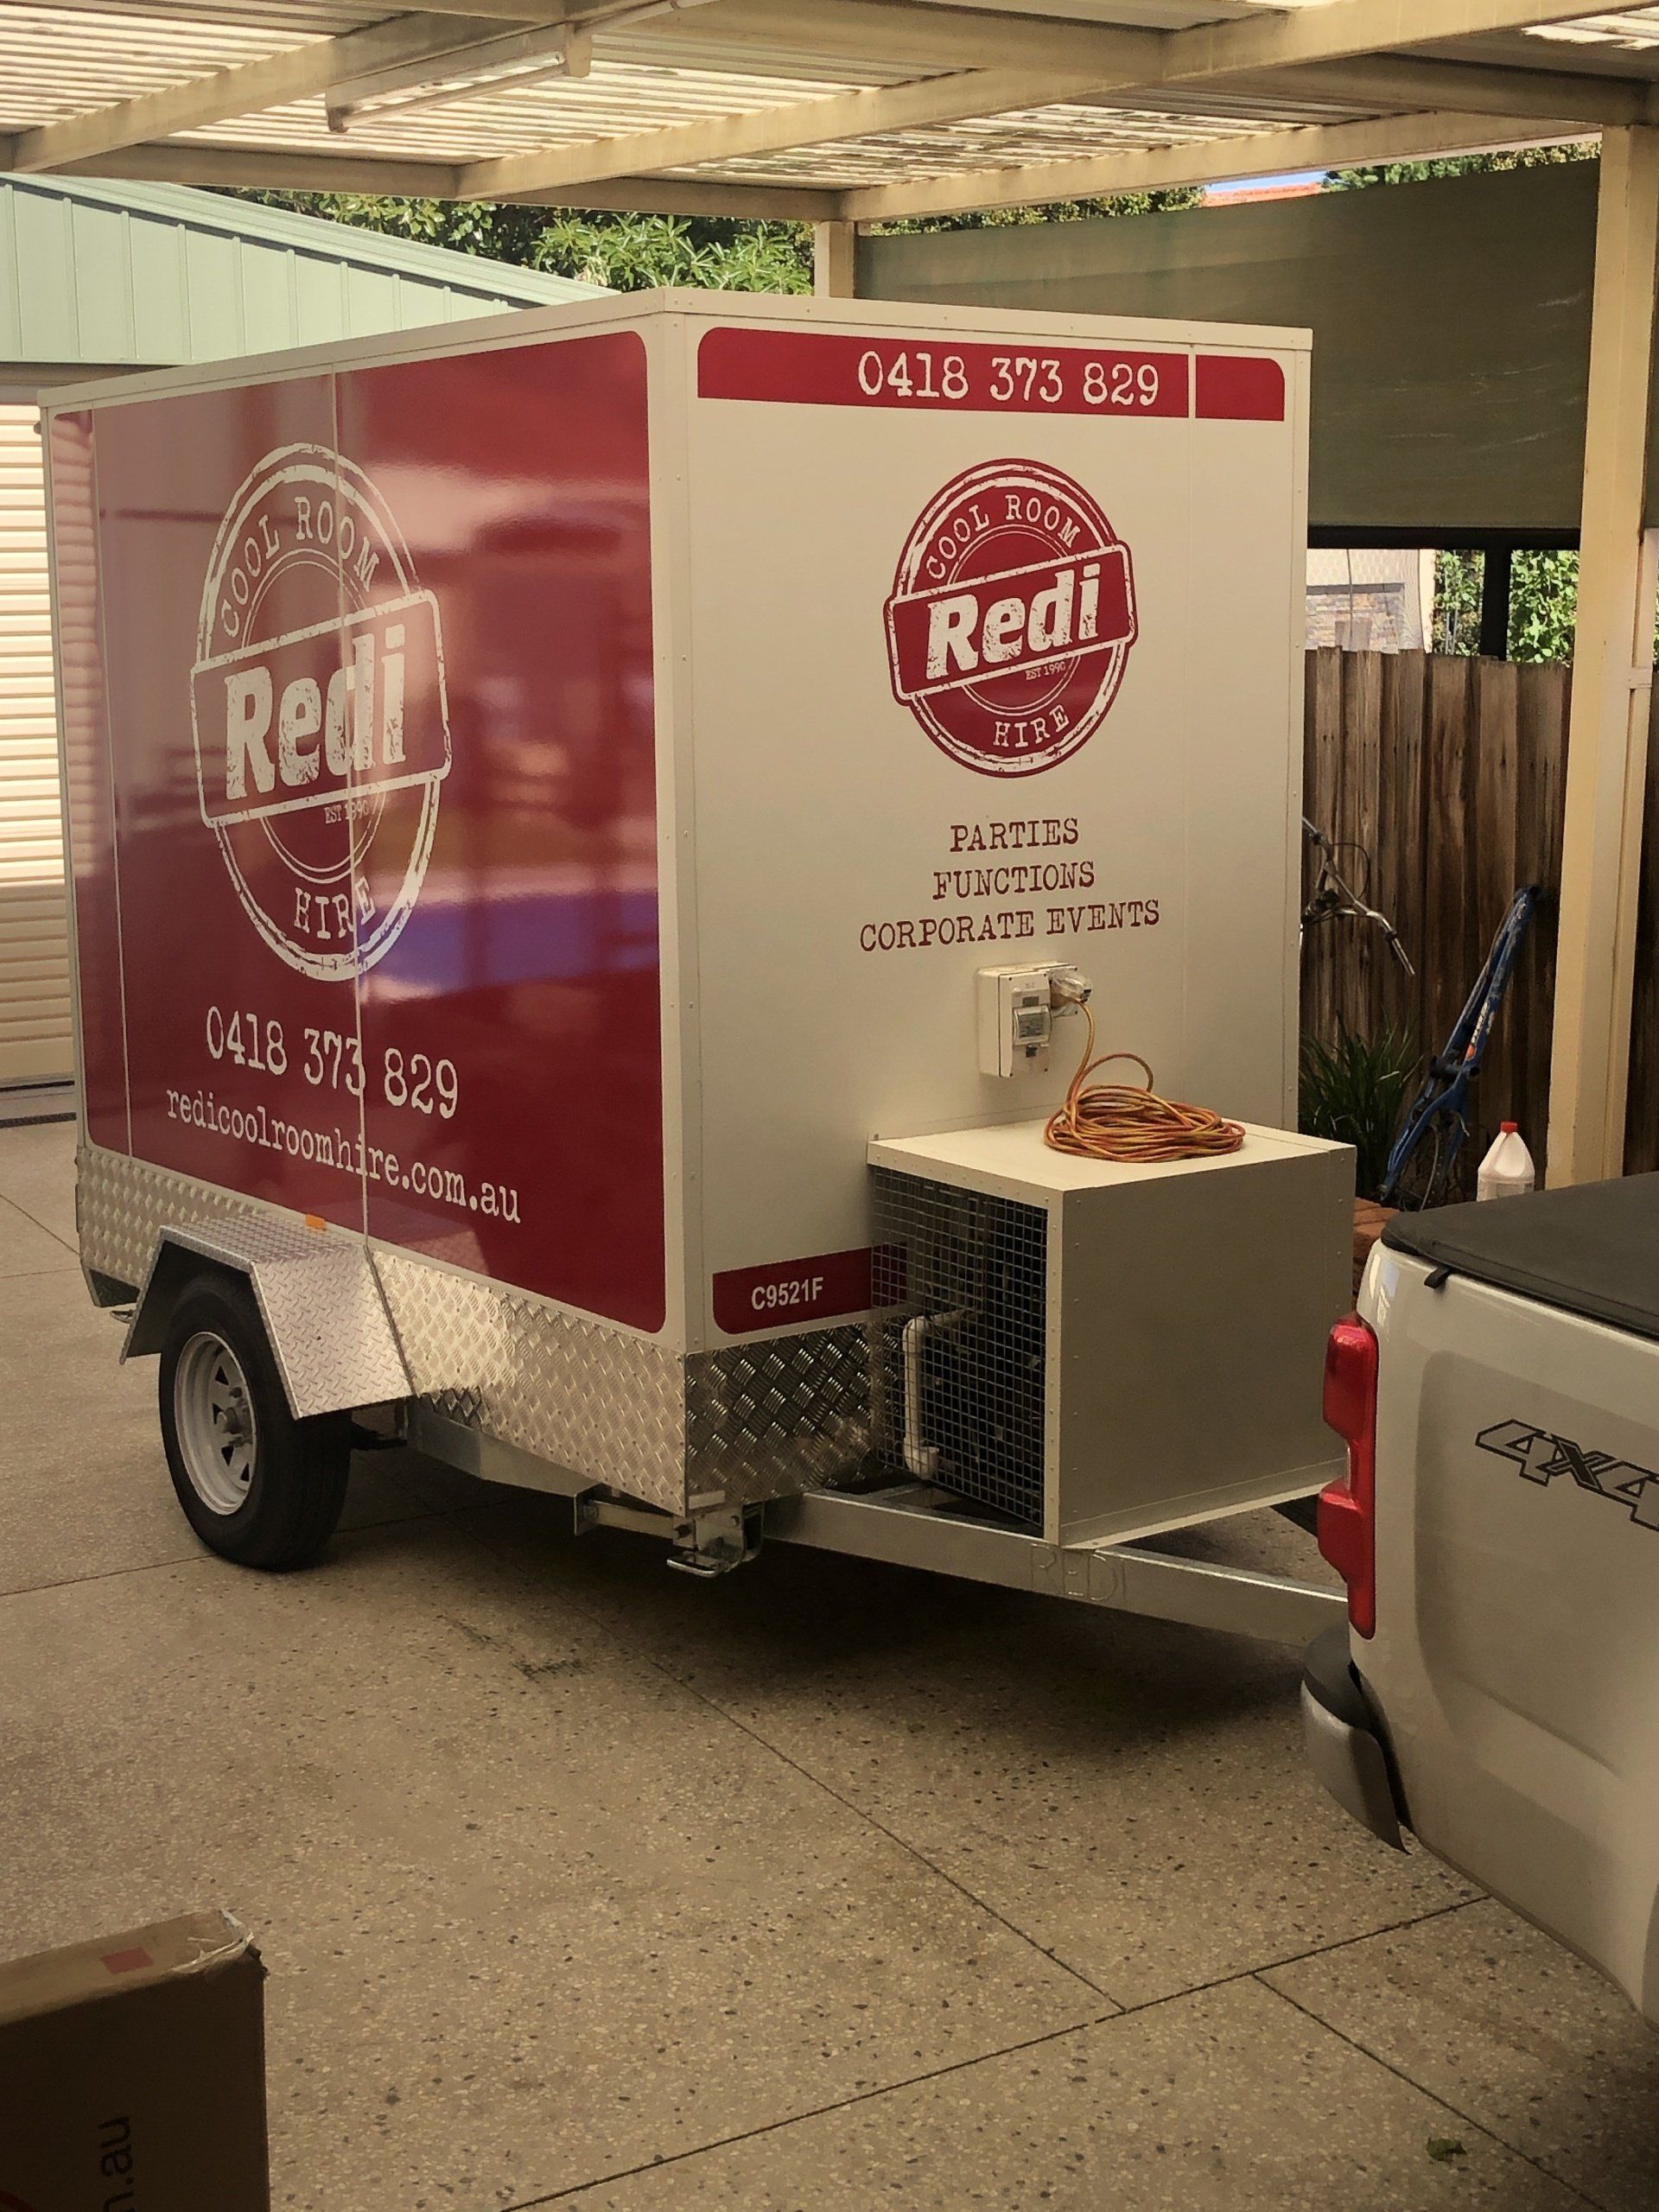 Large Cool Room Trailer hire, mobile coolroom from Redi hire in Melbourne